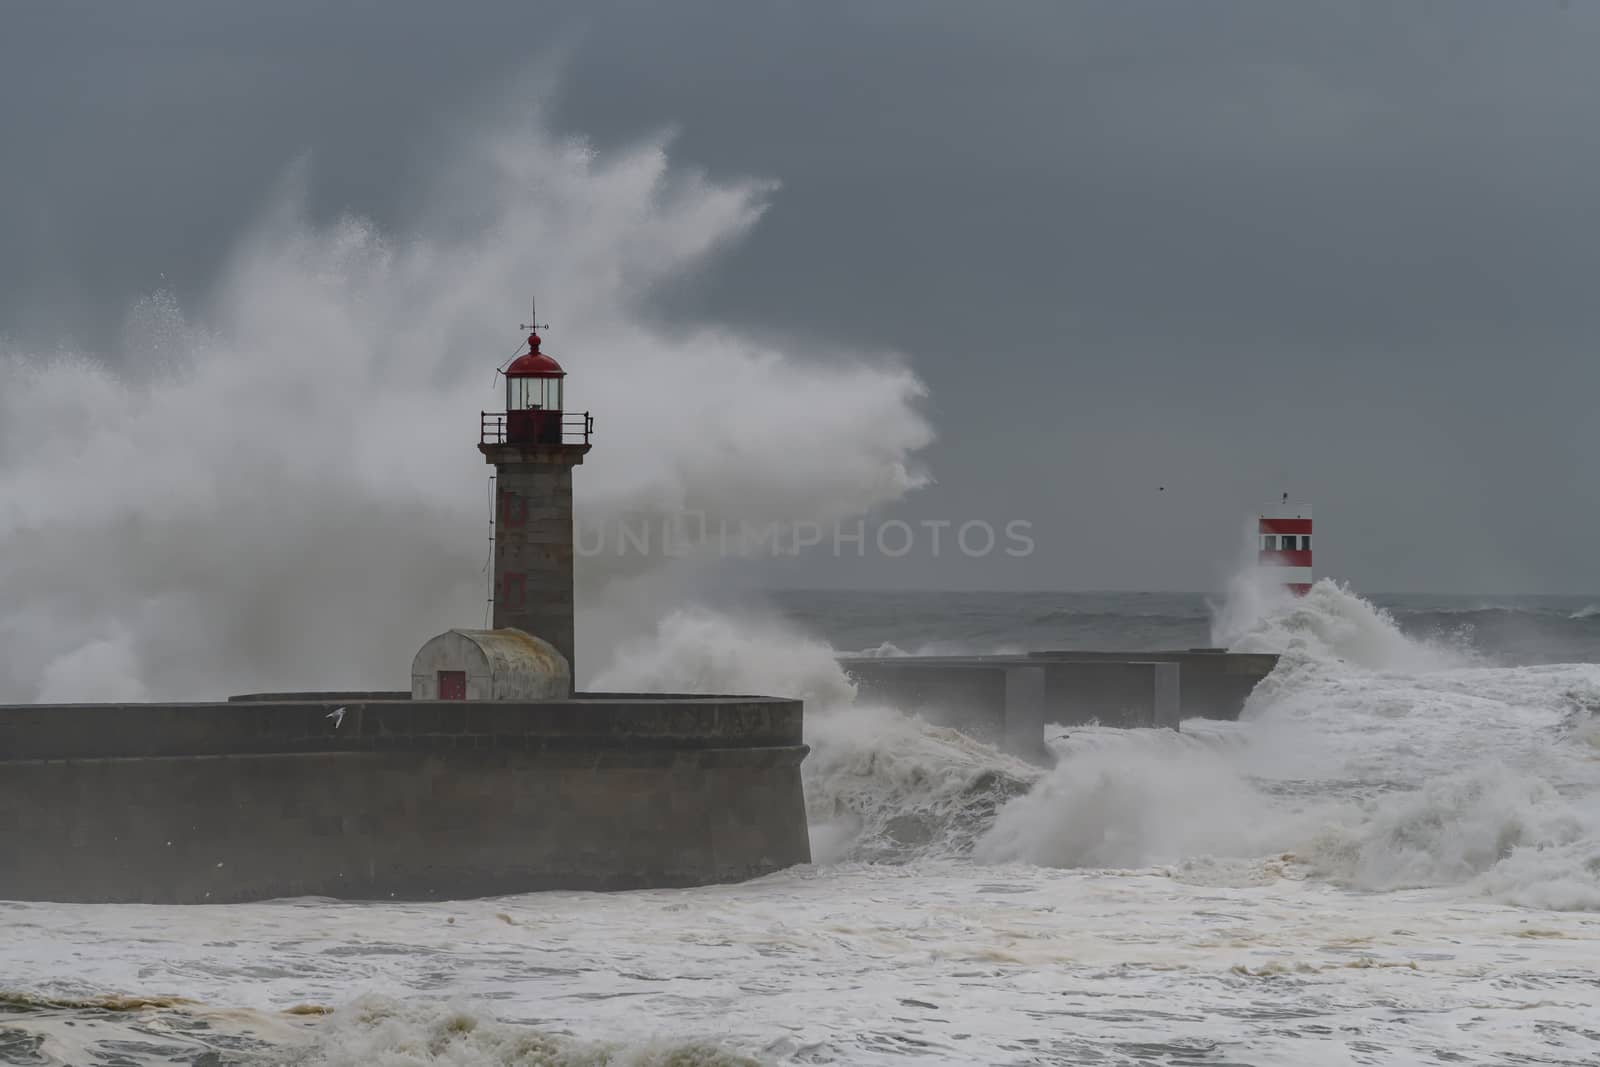 Waves crashing over Porto Lighthouse in a storm